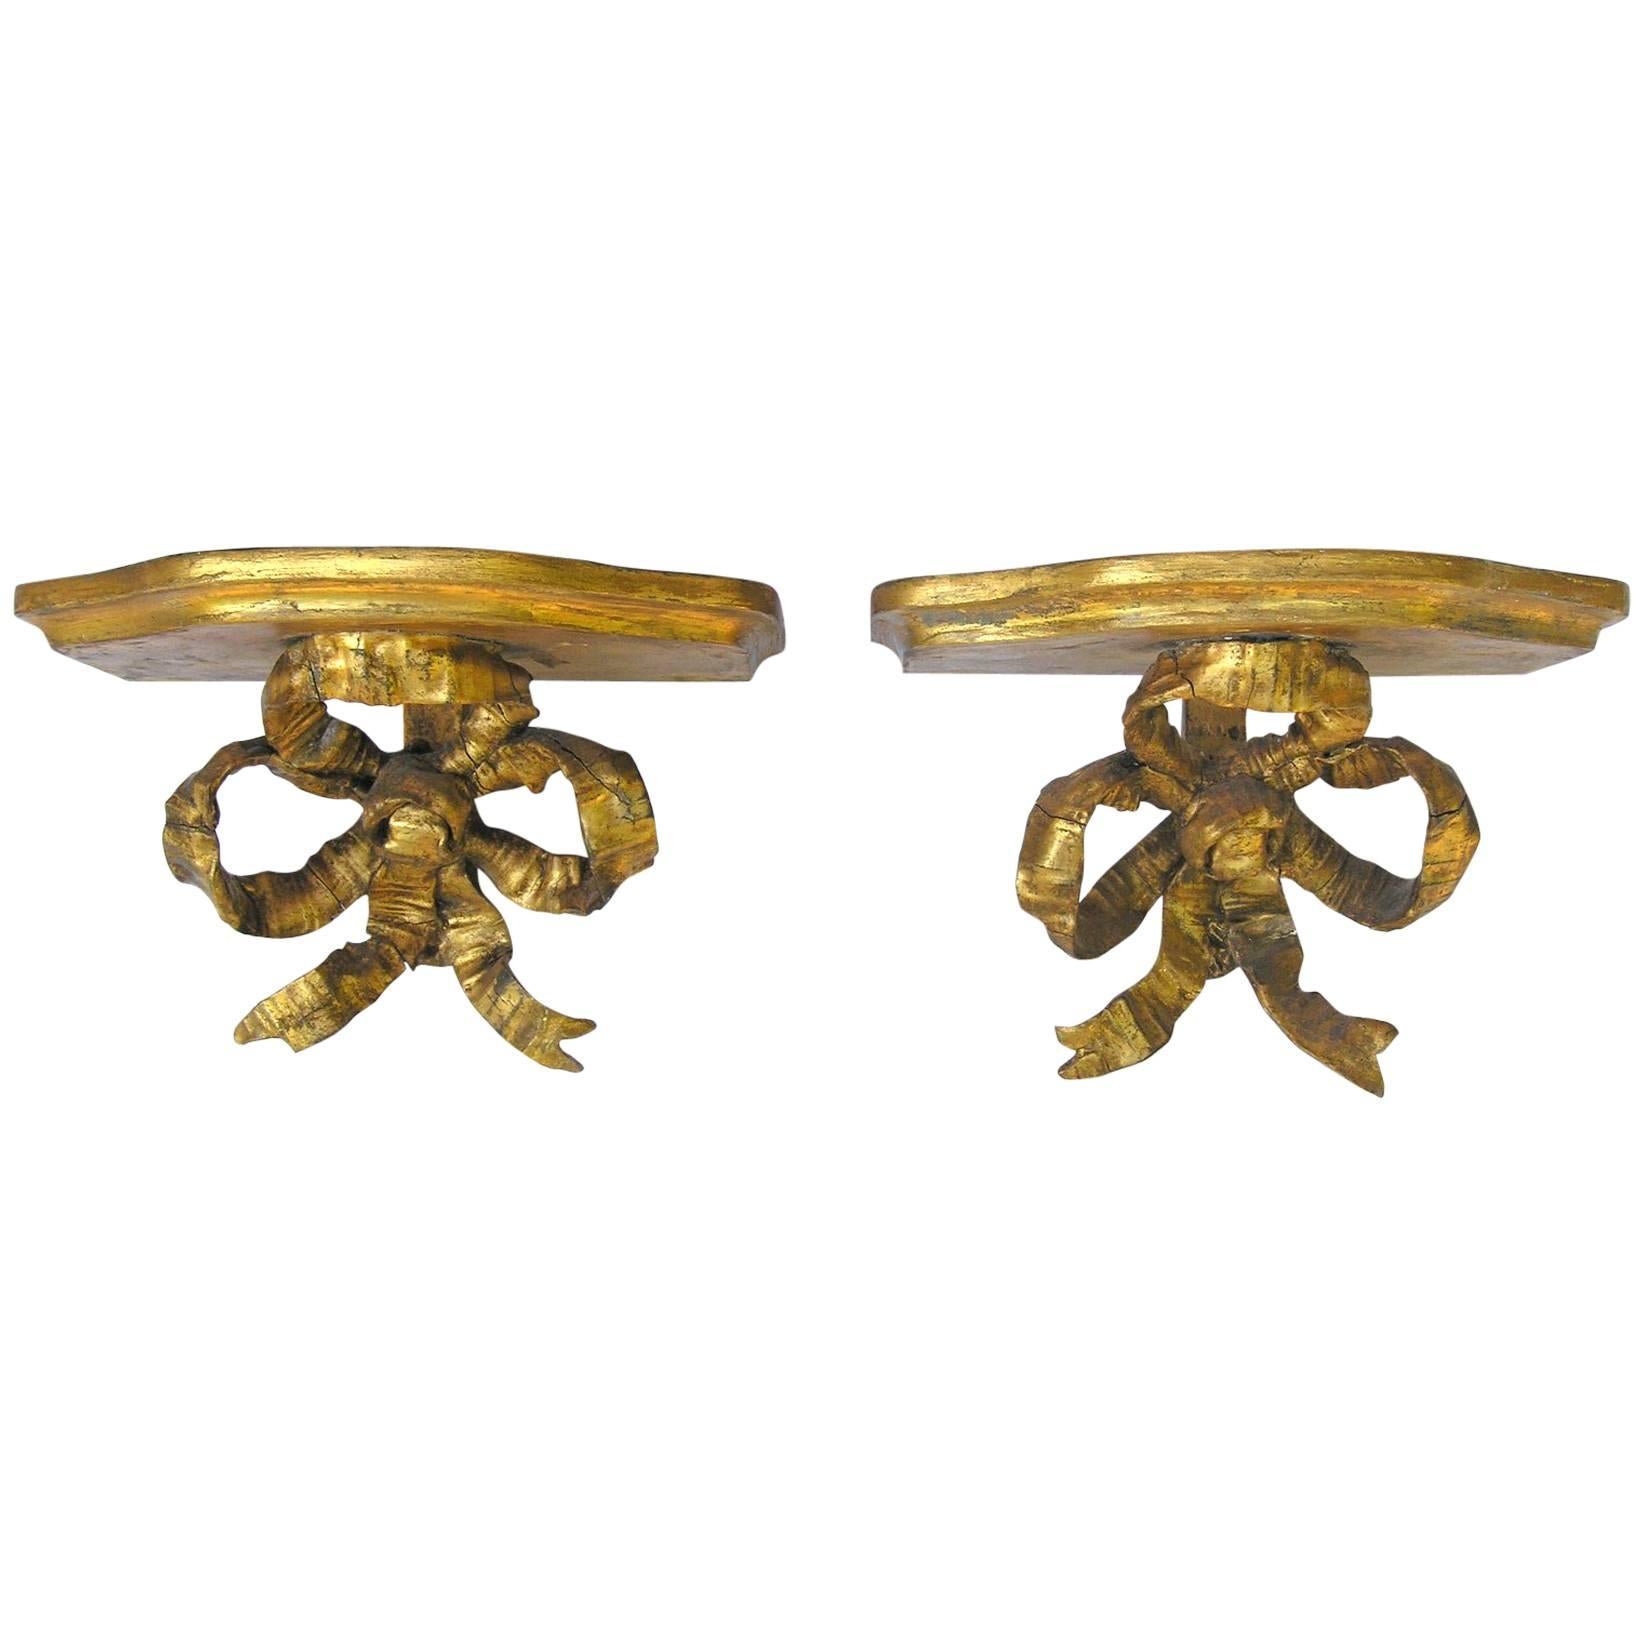 Pair of English 18th Century Gold Leaf Bow Sconces/Wall Decor For Sale